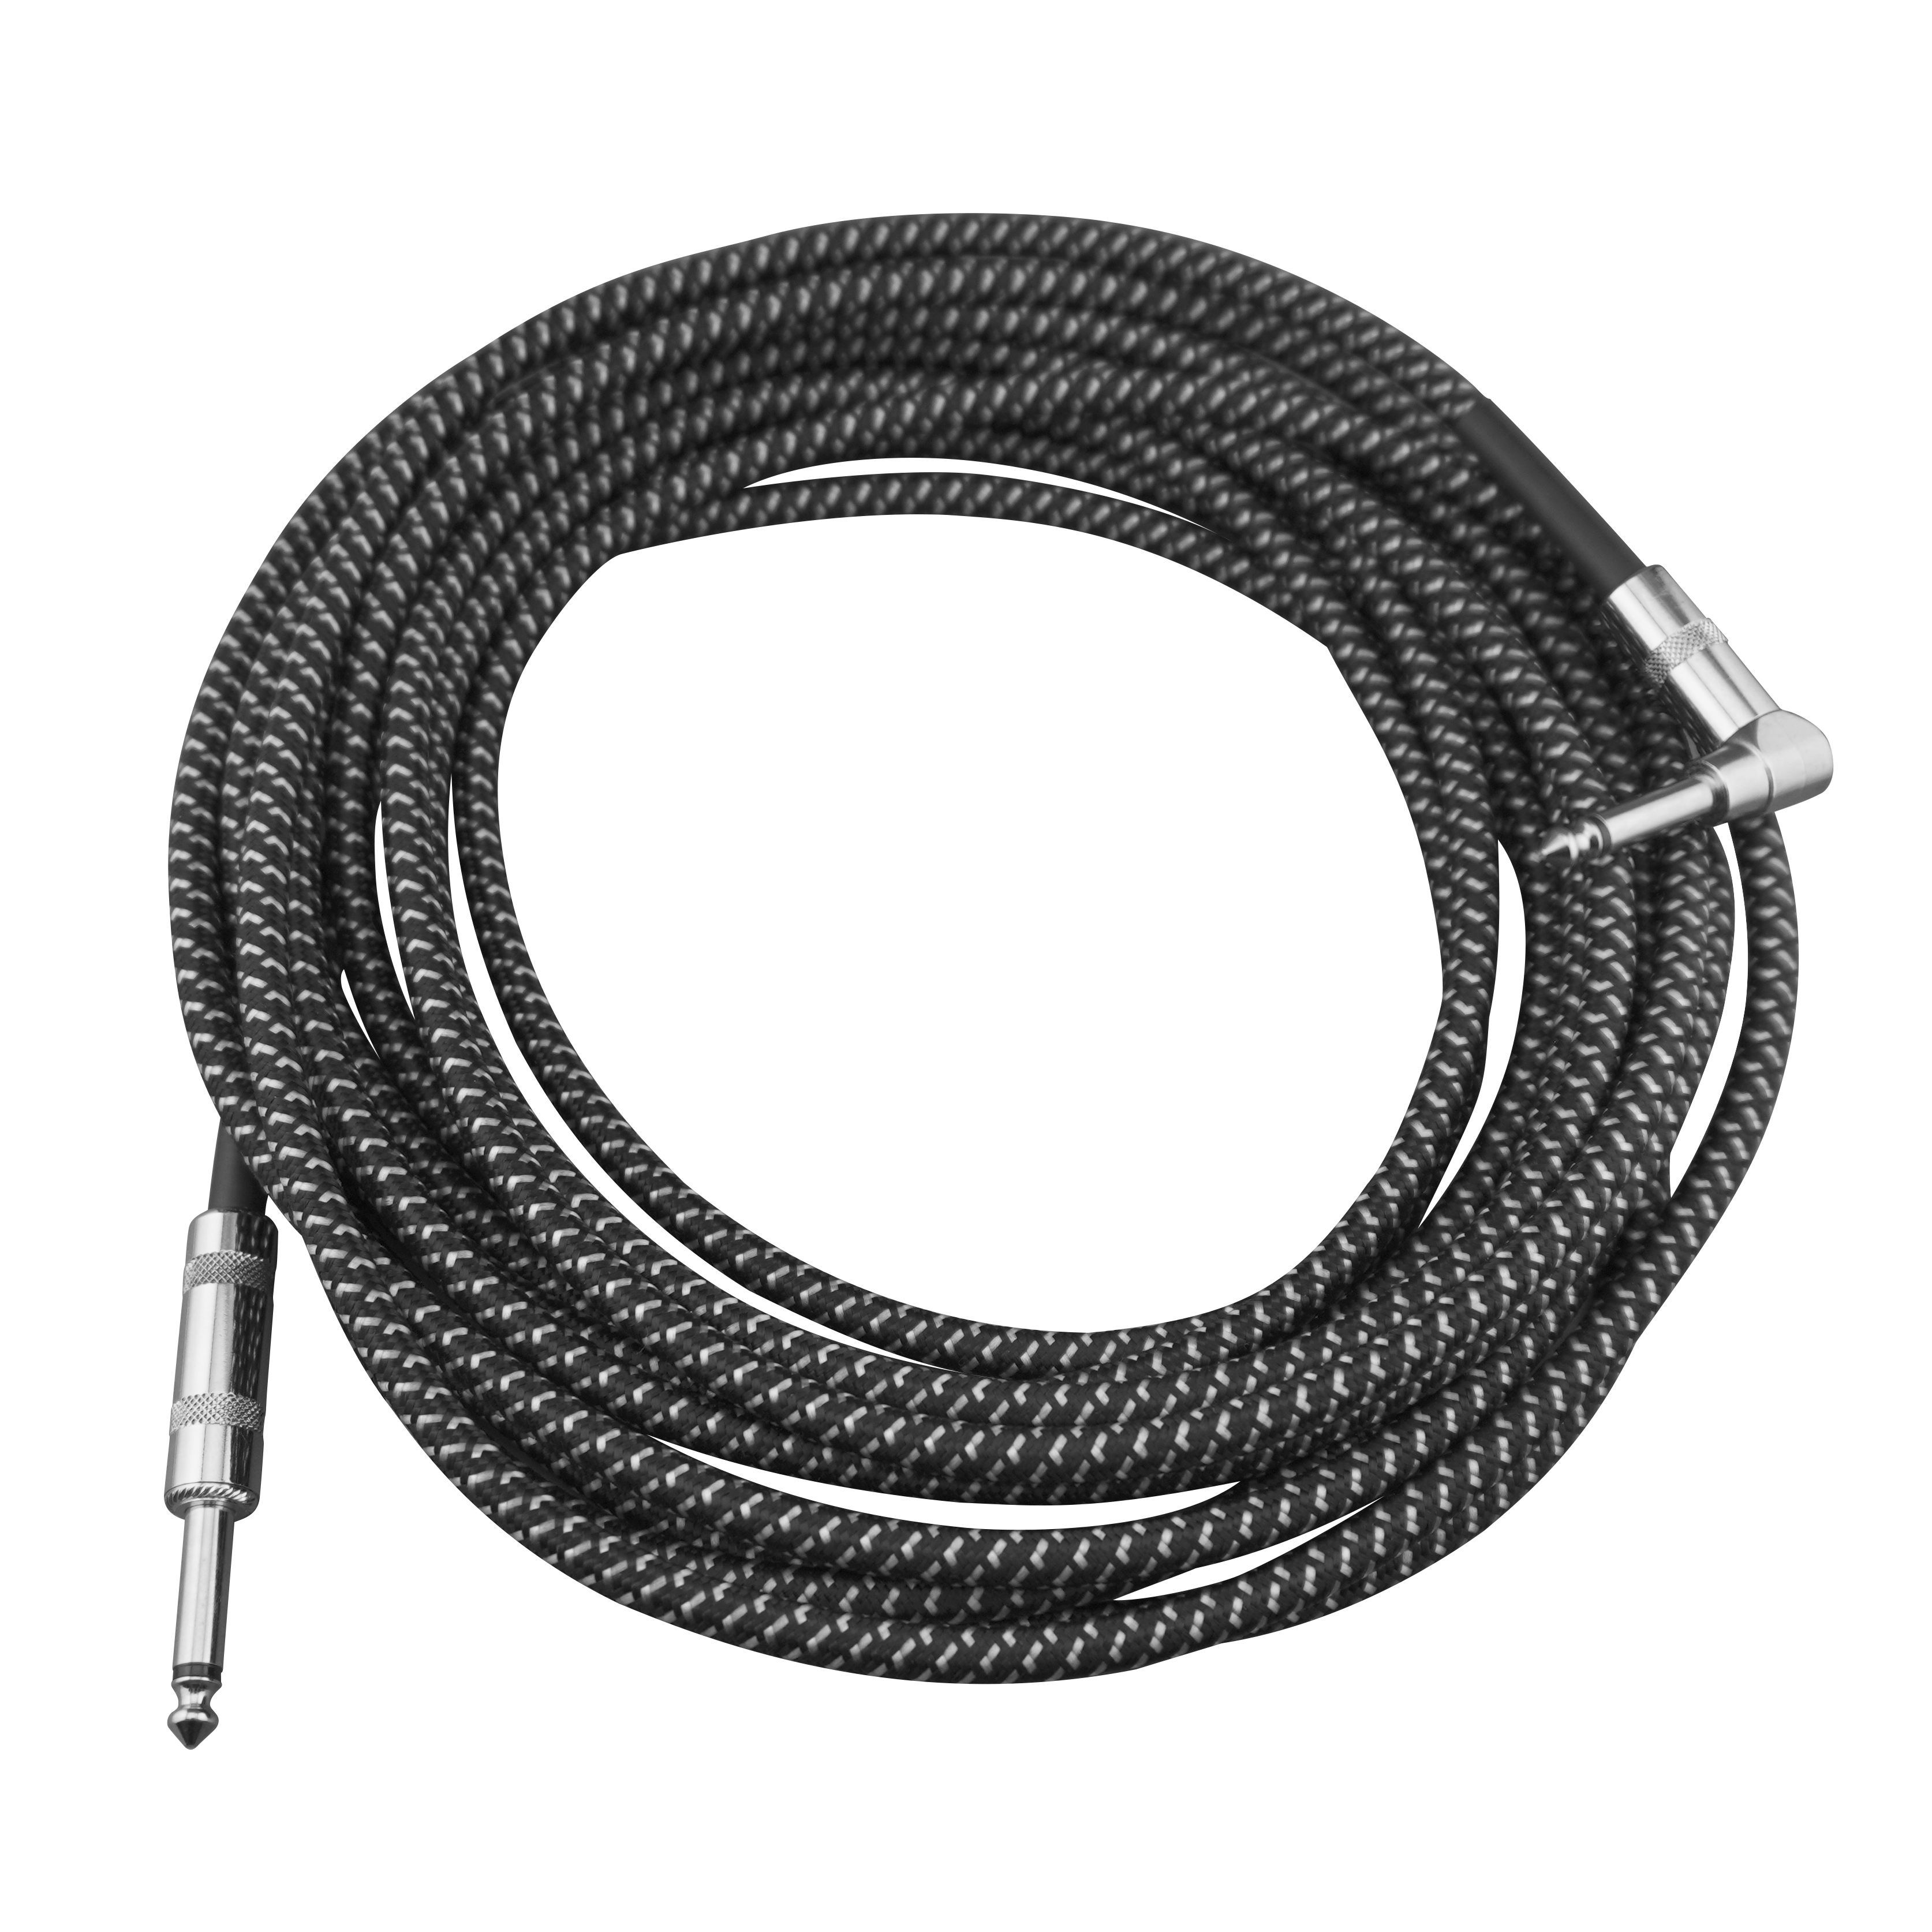 Braided Instrument Cable - Black/Grey 24ft